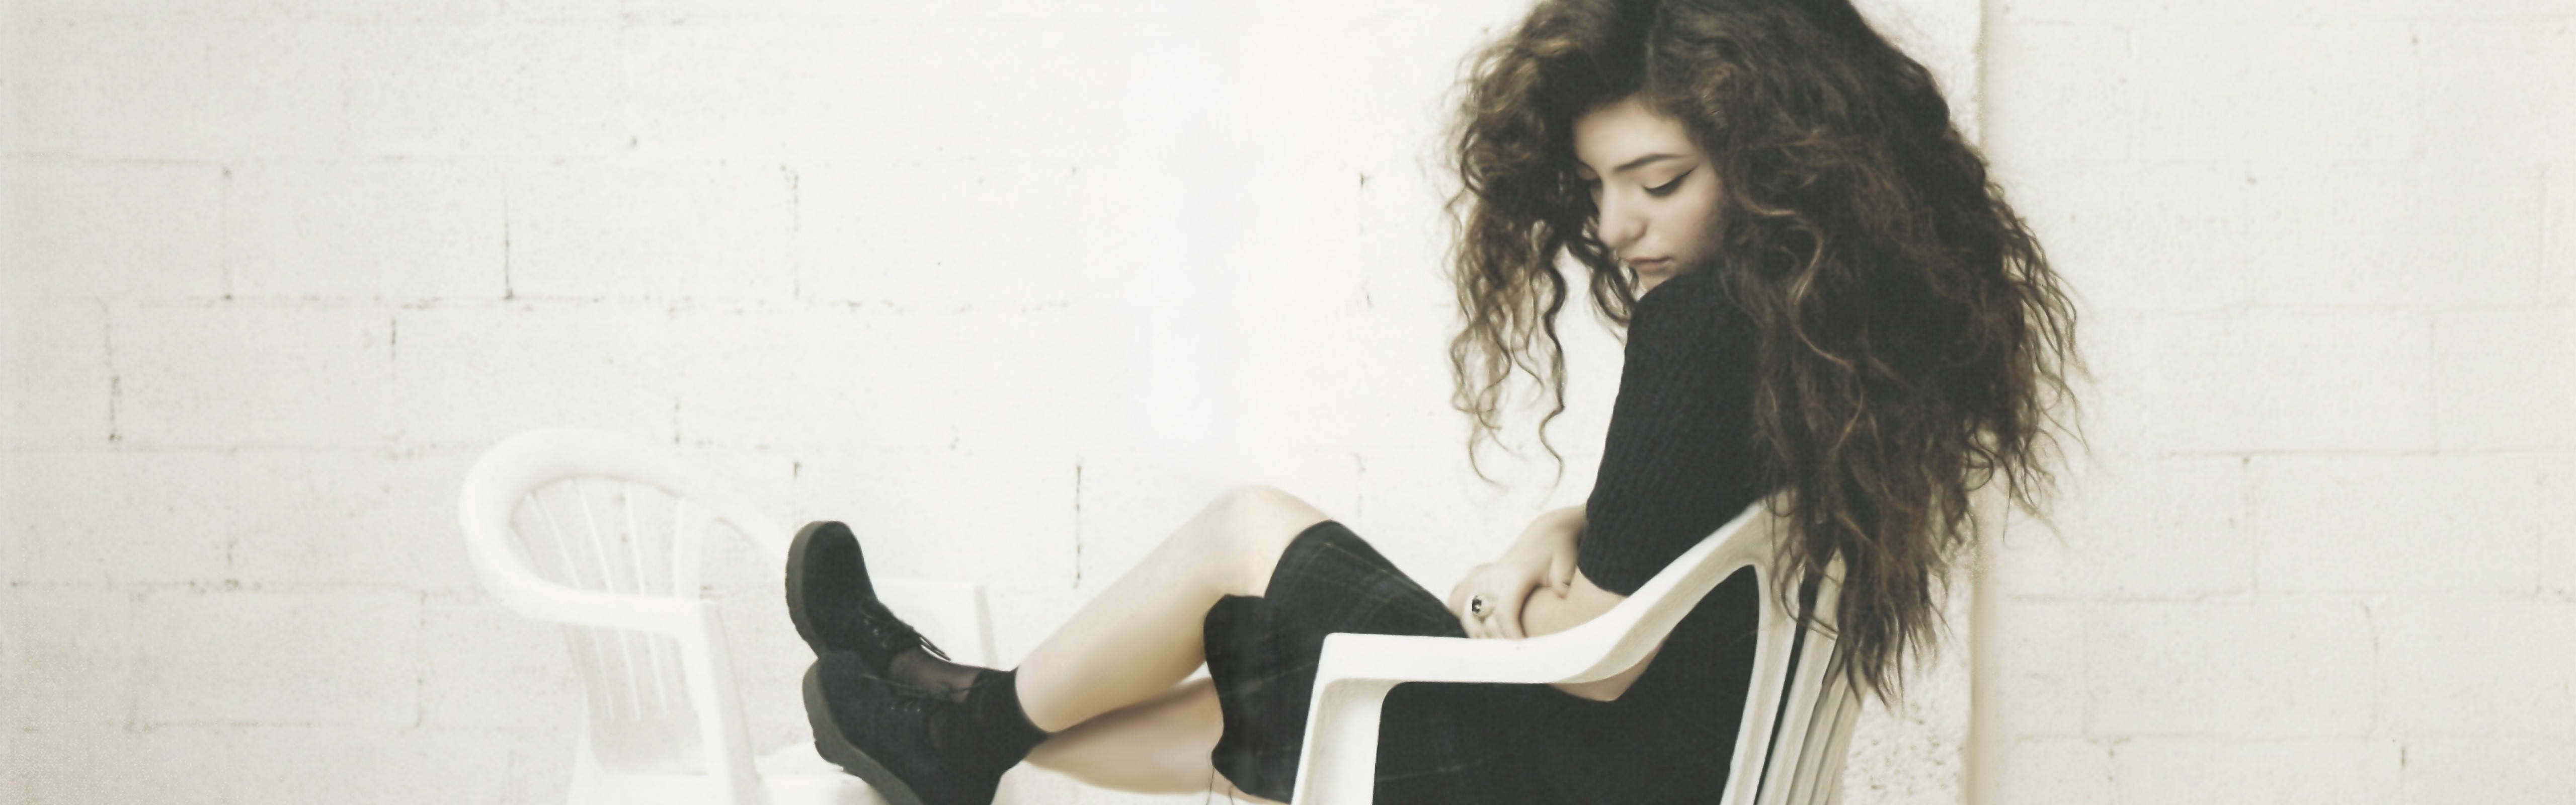 Lorde In Chair Dual Monitor Wallpaper